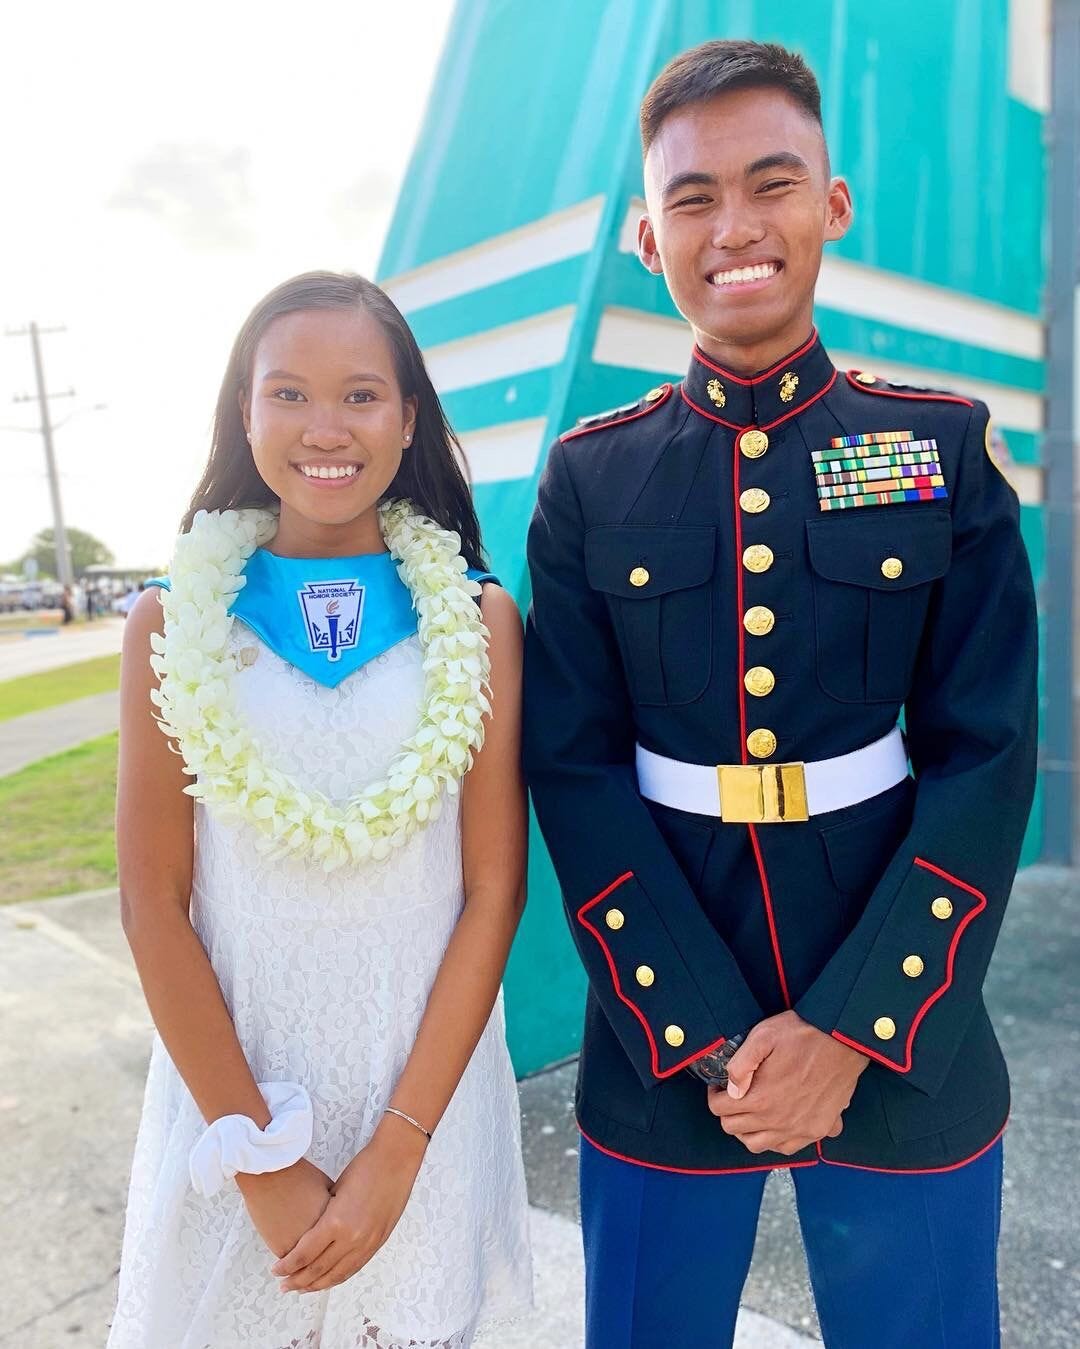 Jean Bactad, left, and her partner and recent Naval Academy appointee Alexander Reglos Saber, right, at Okkodo High School's 2019 graduation at the University of Guam fieldhouse. The young couple has kept the sparks flying in their relationship despite the difficulties of a long-distance relationship.